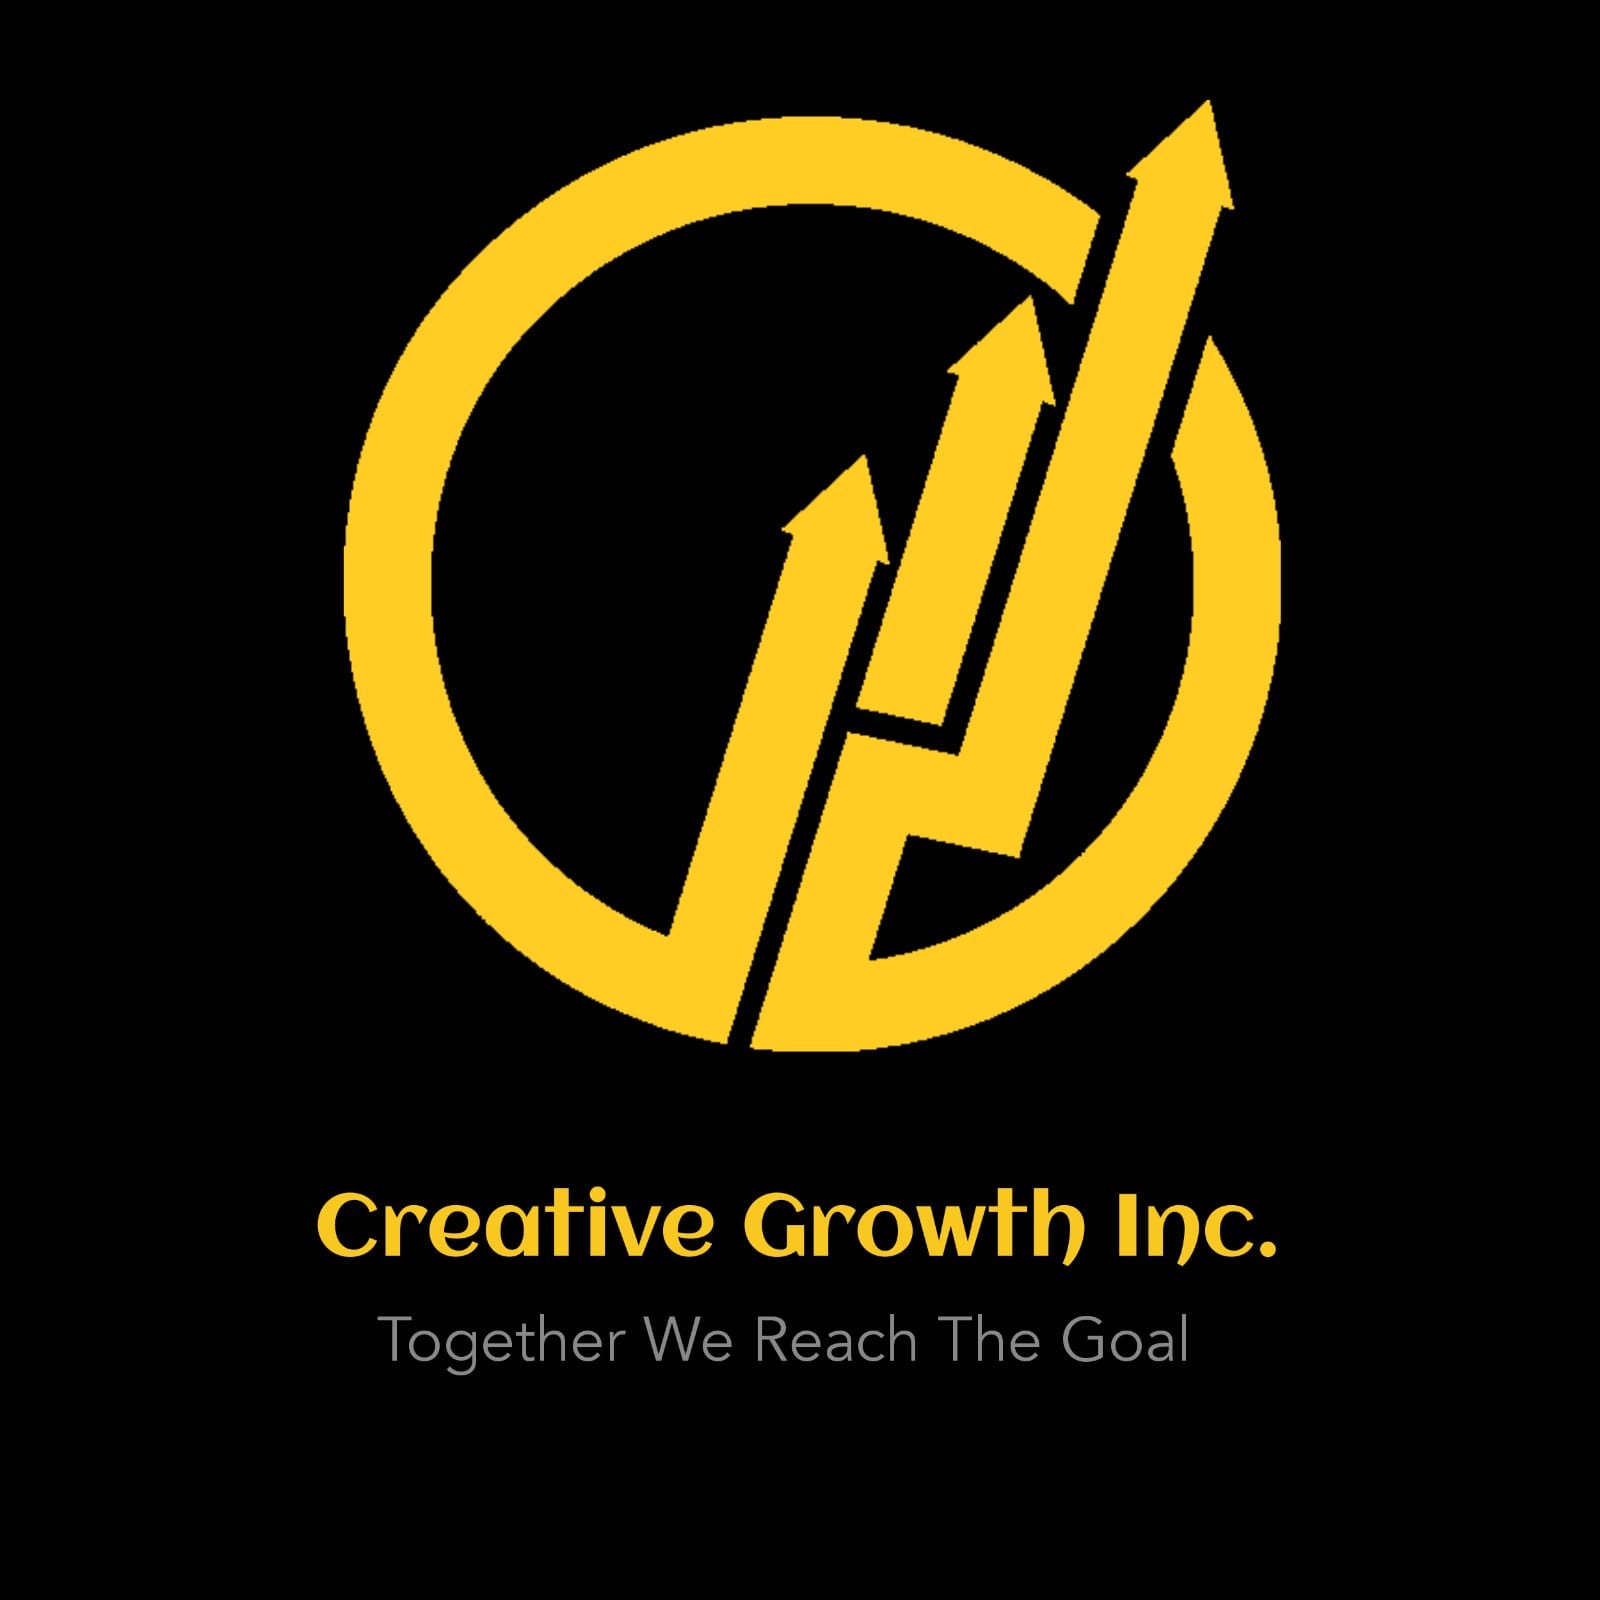 https://www.mncjobs.co.za/company/creative-growth-incorporated